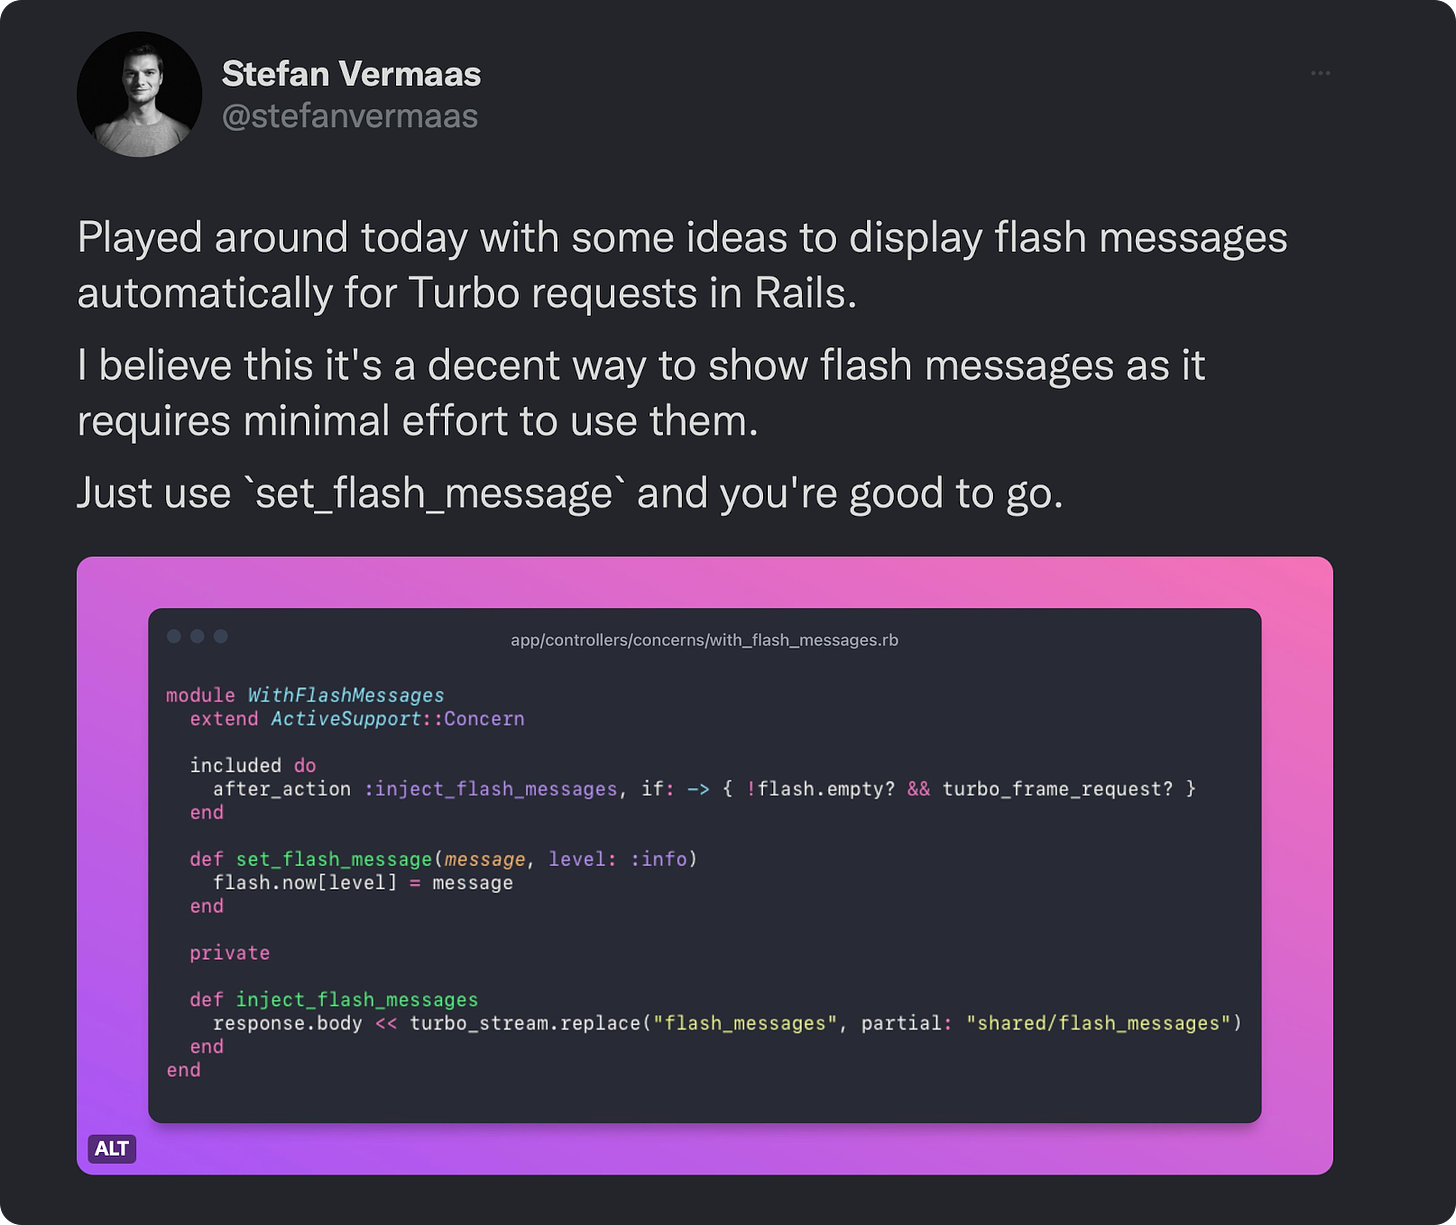 Played around today with some ideas to display flash messages automatically for Turbo requests in Rails. I believe this it's a decent way to show flash messages as it requires minimal effort to use them. Just use `set_flash_message` and you're good to go.